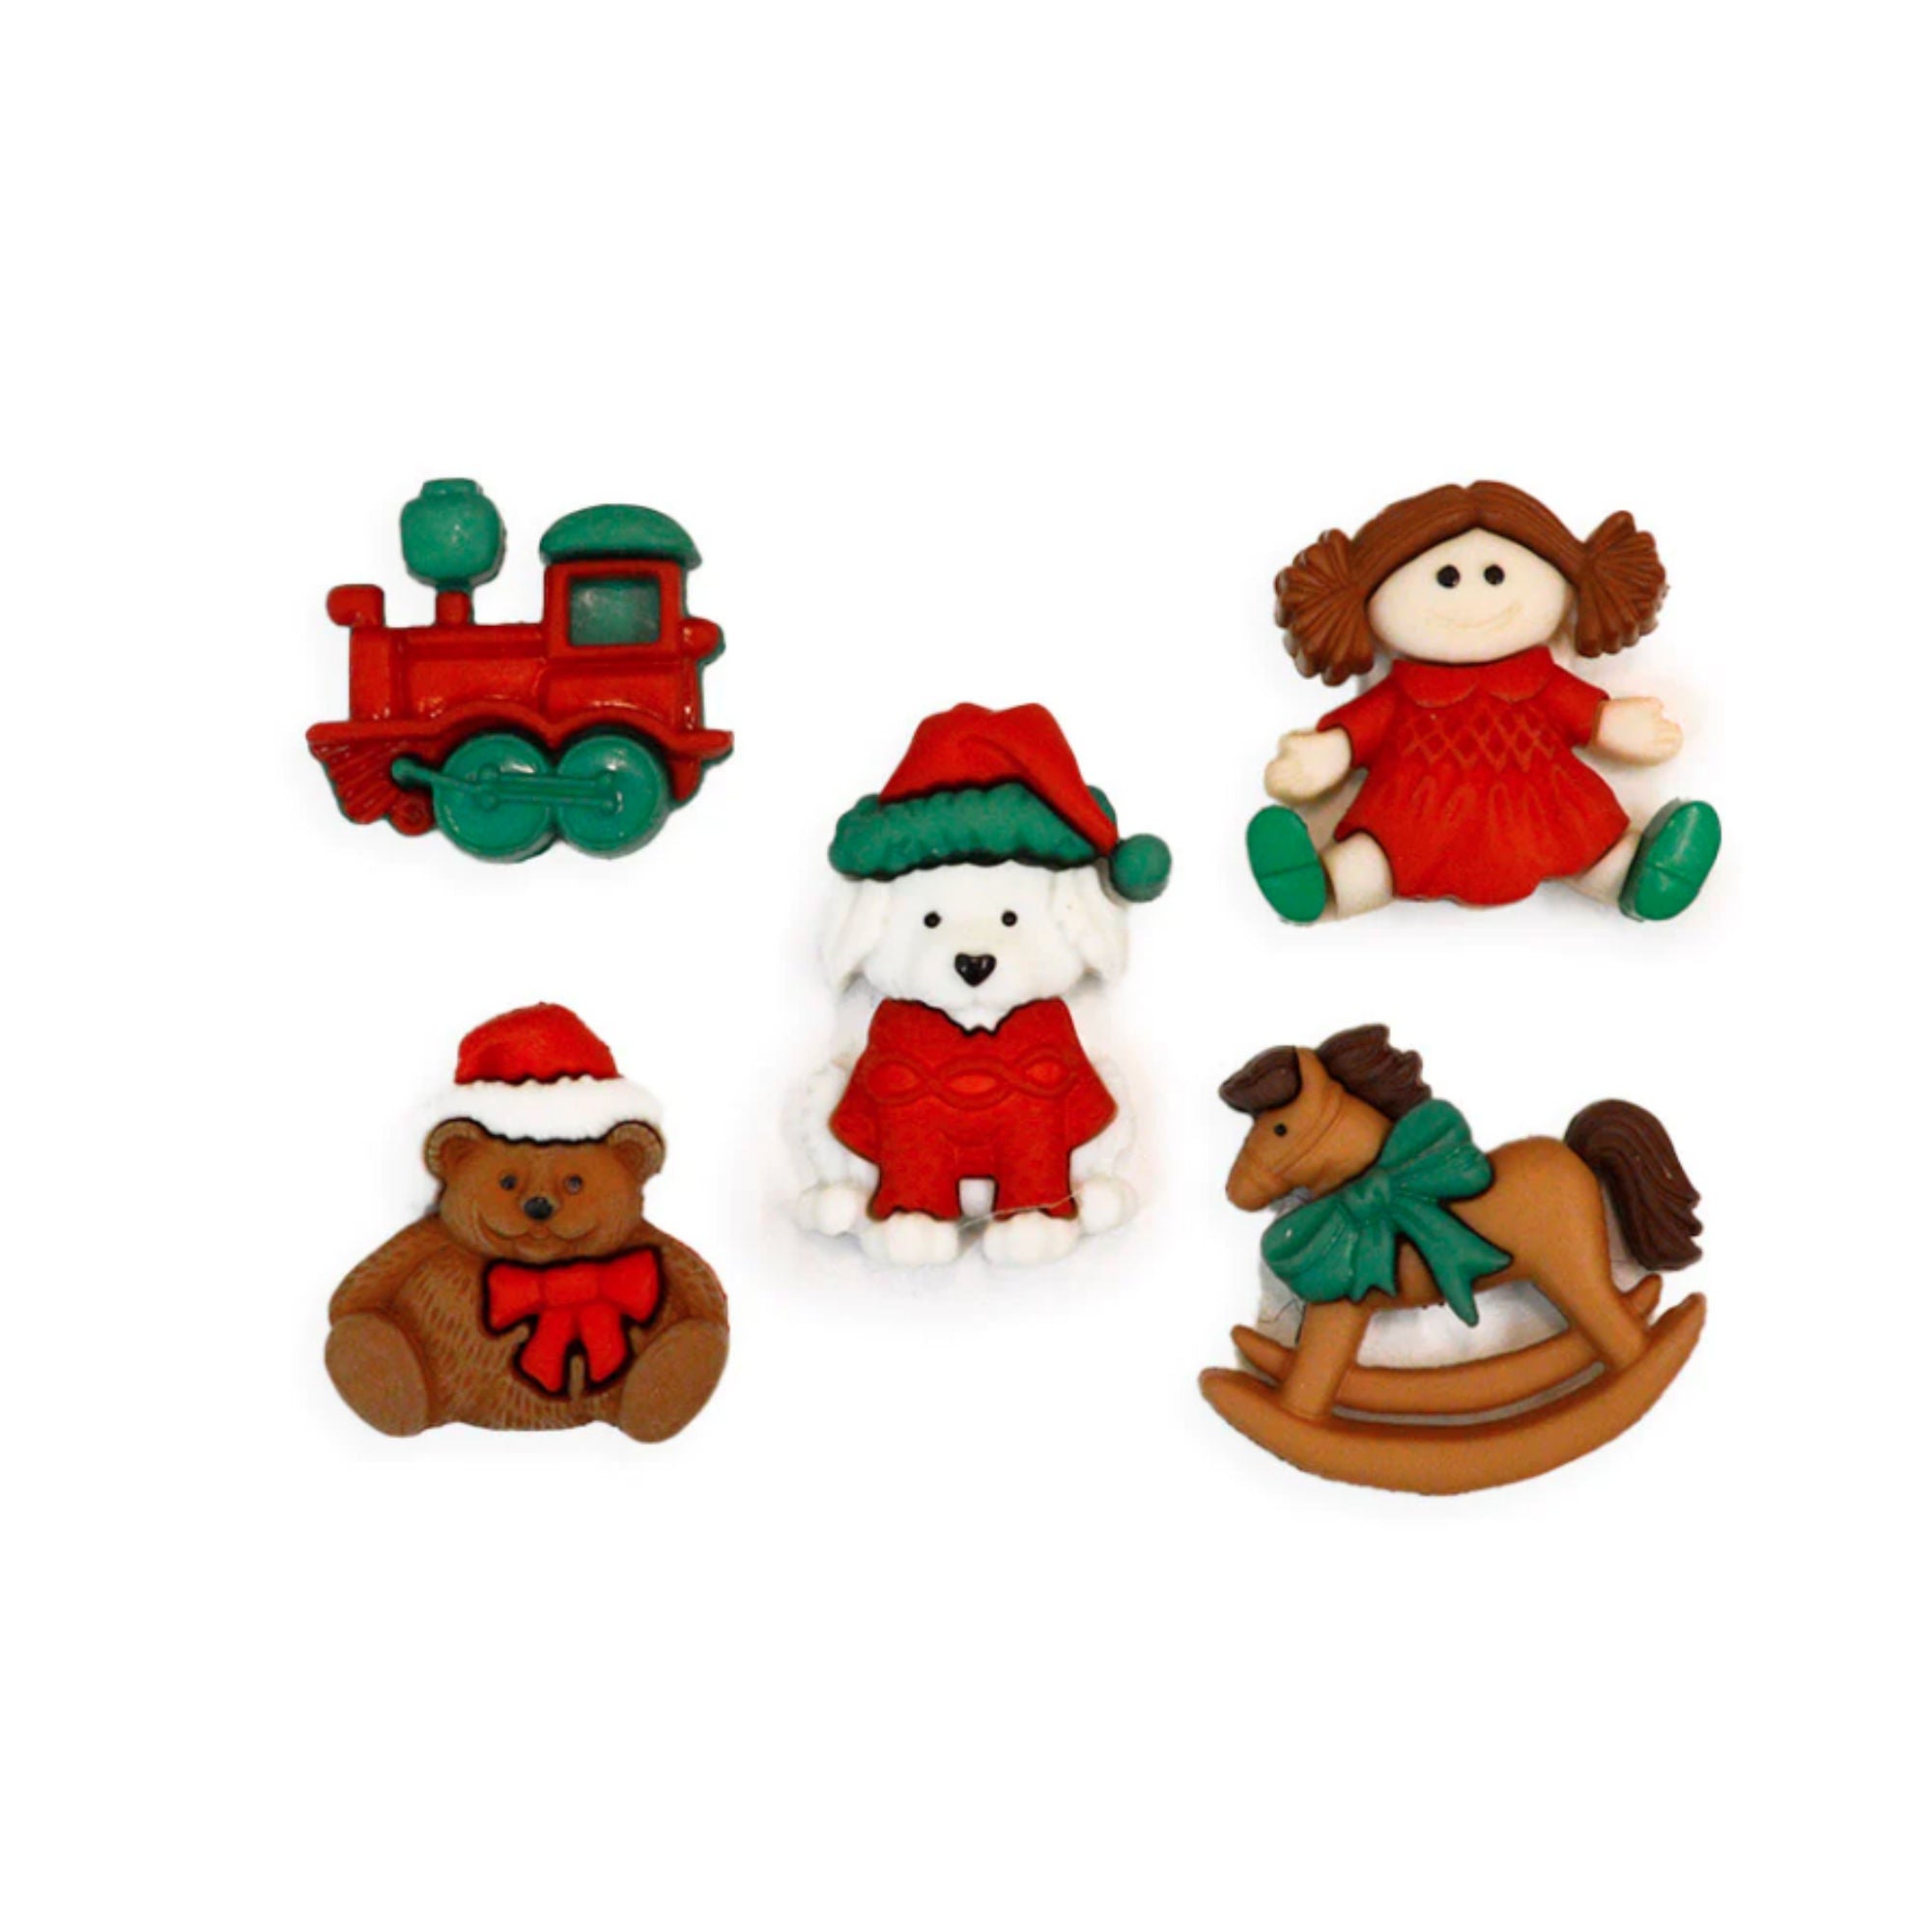 Dress It Up Collection Holiday Toys Christmas Scrapbook Buttons by Jesse James Buttons